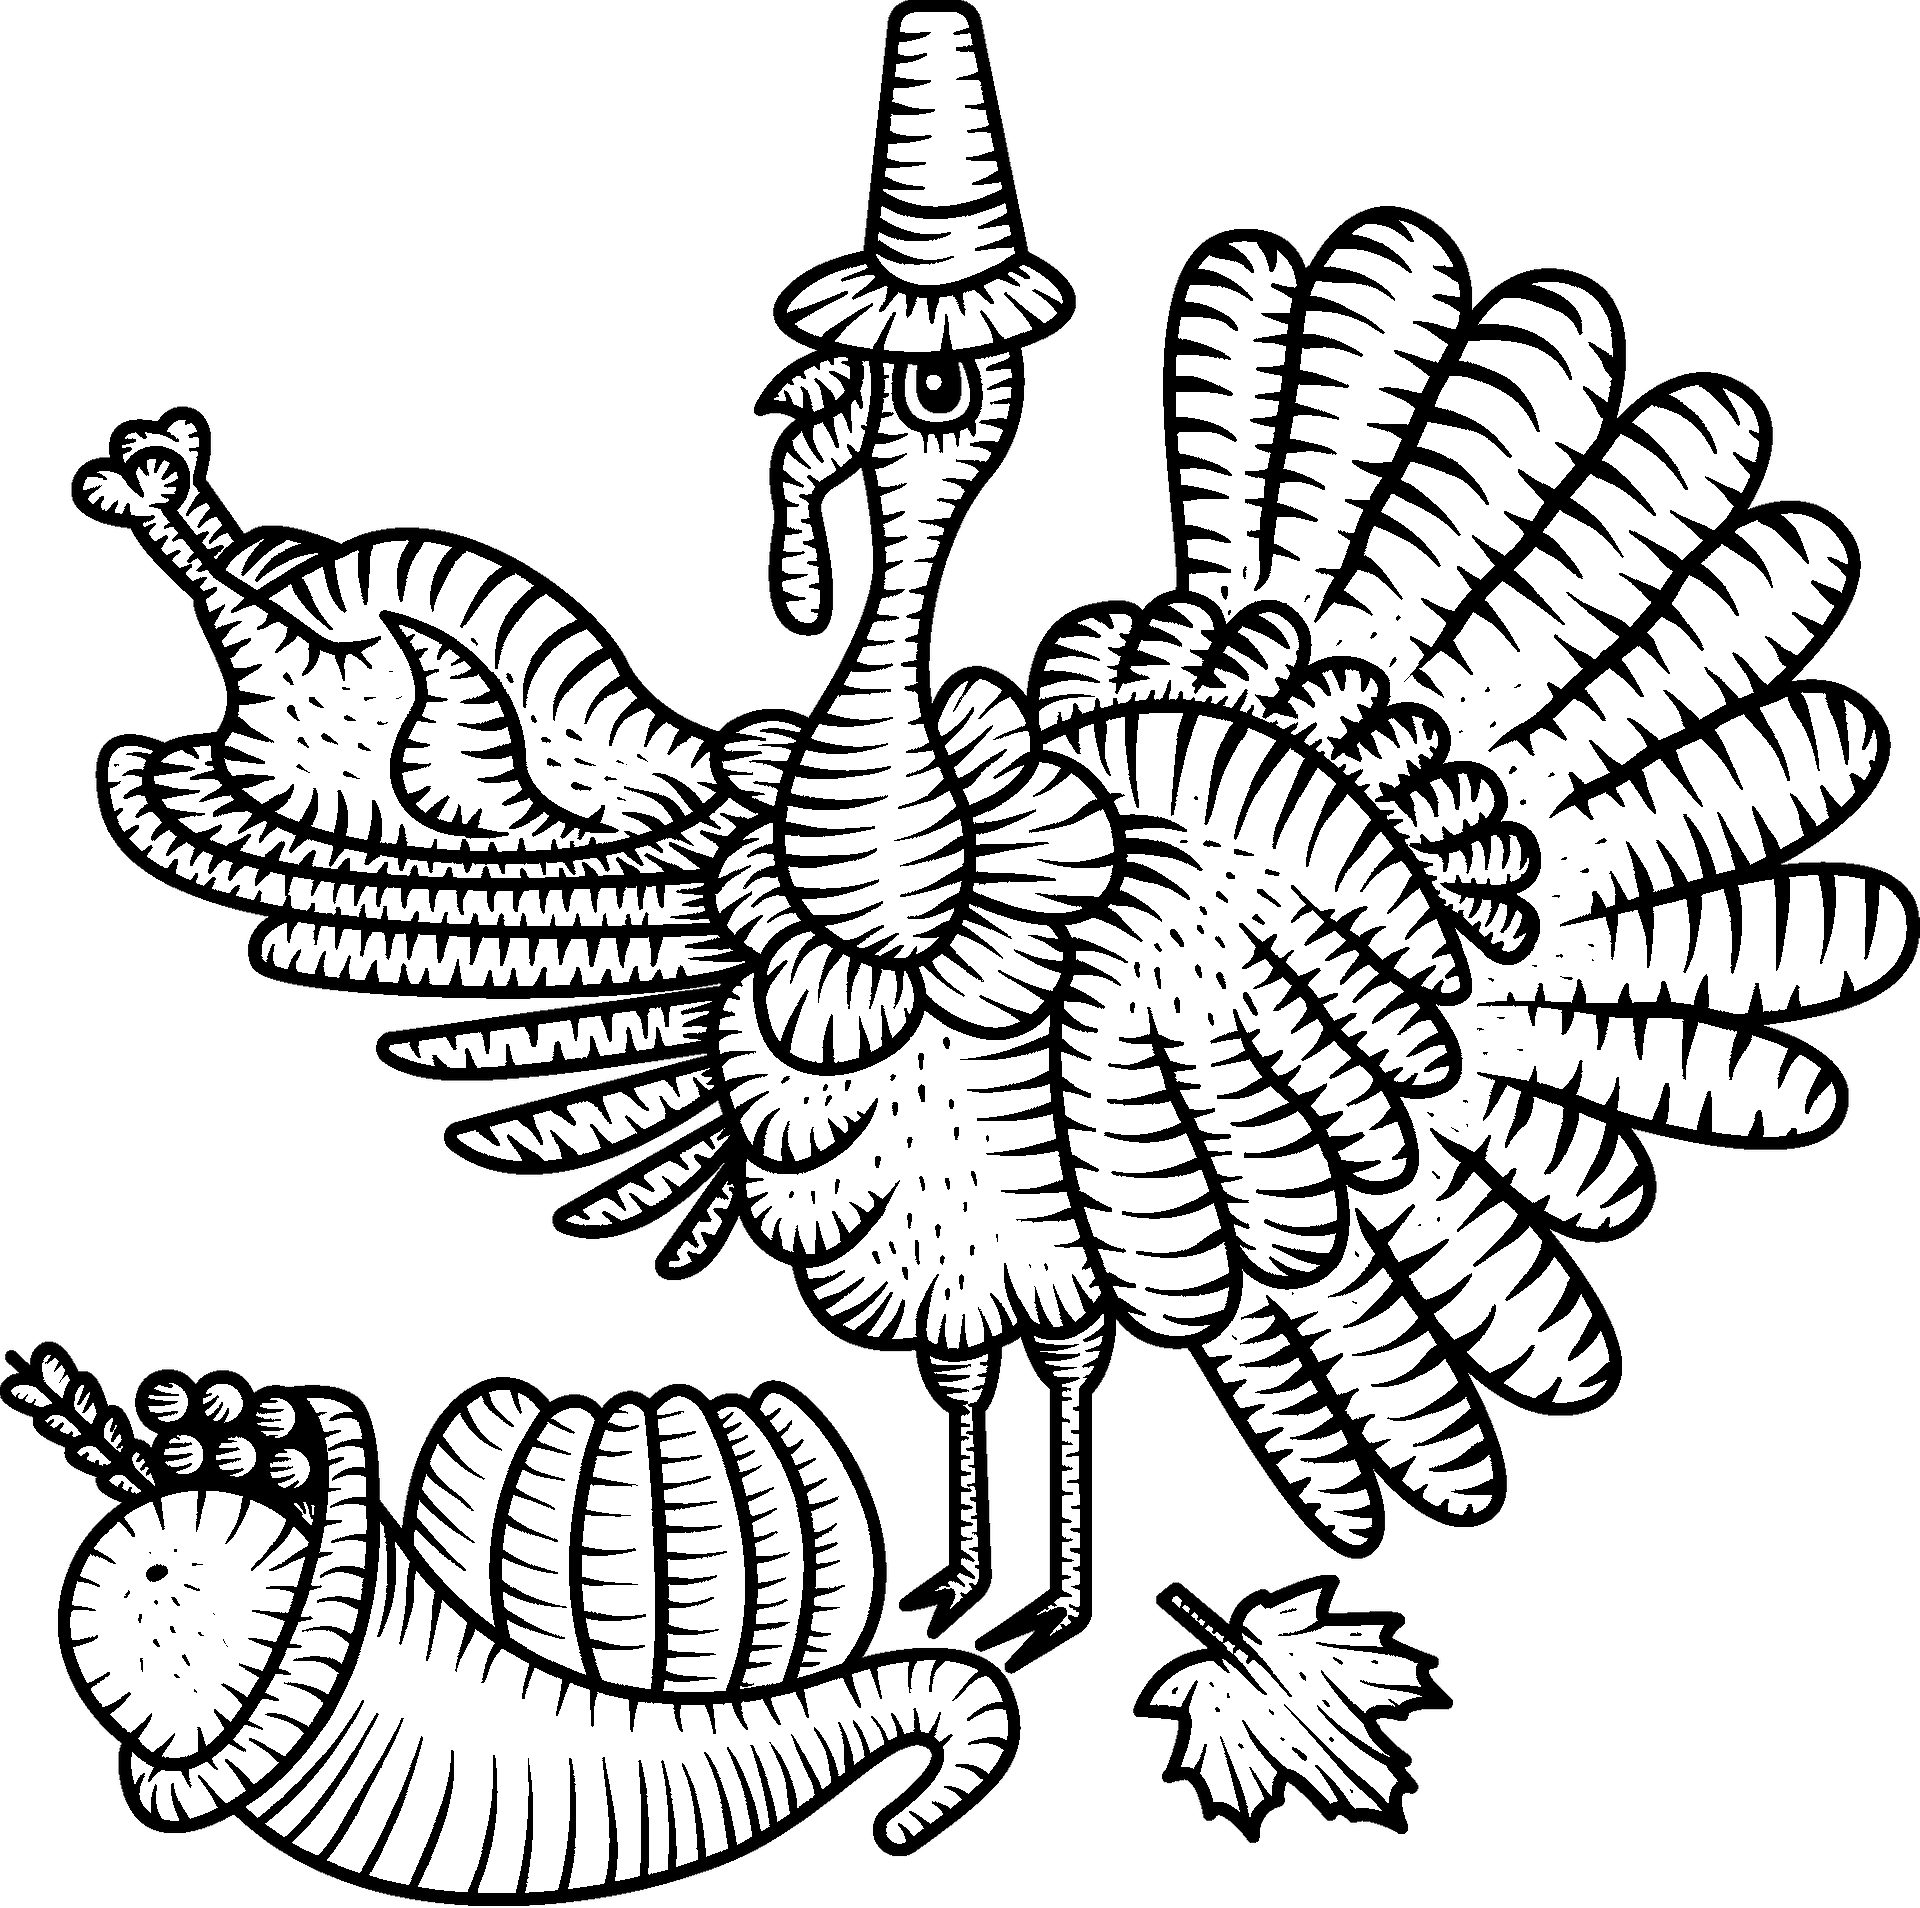 Coloring page of a turkey